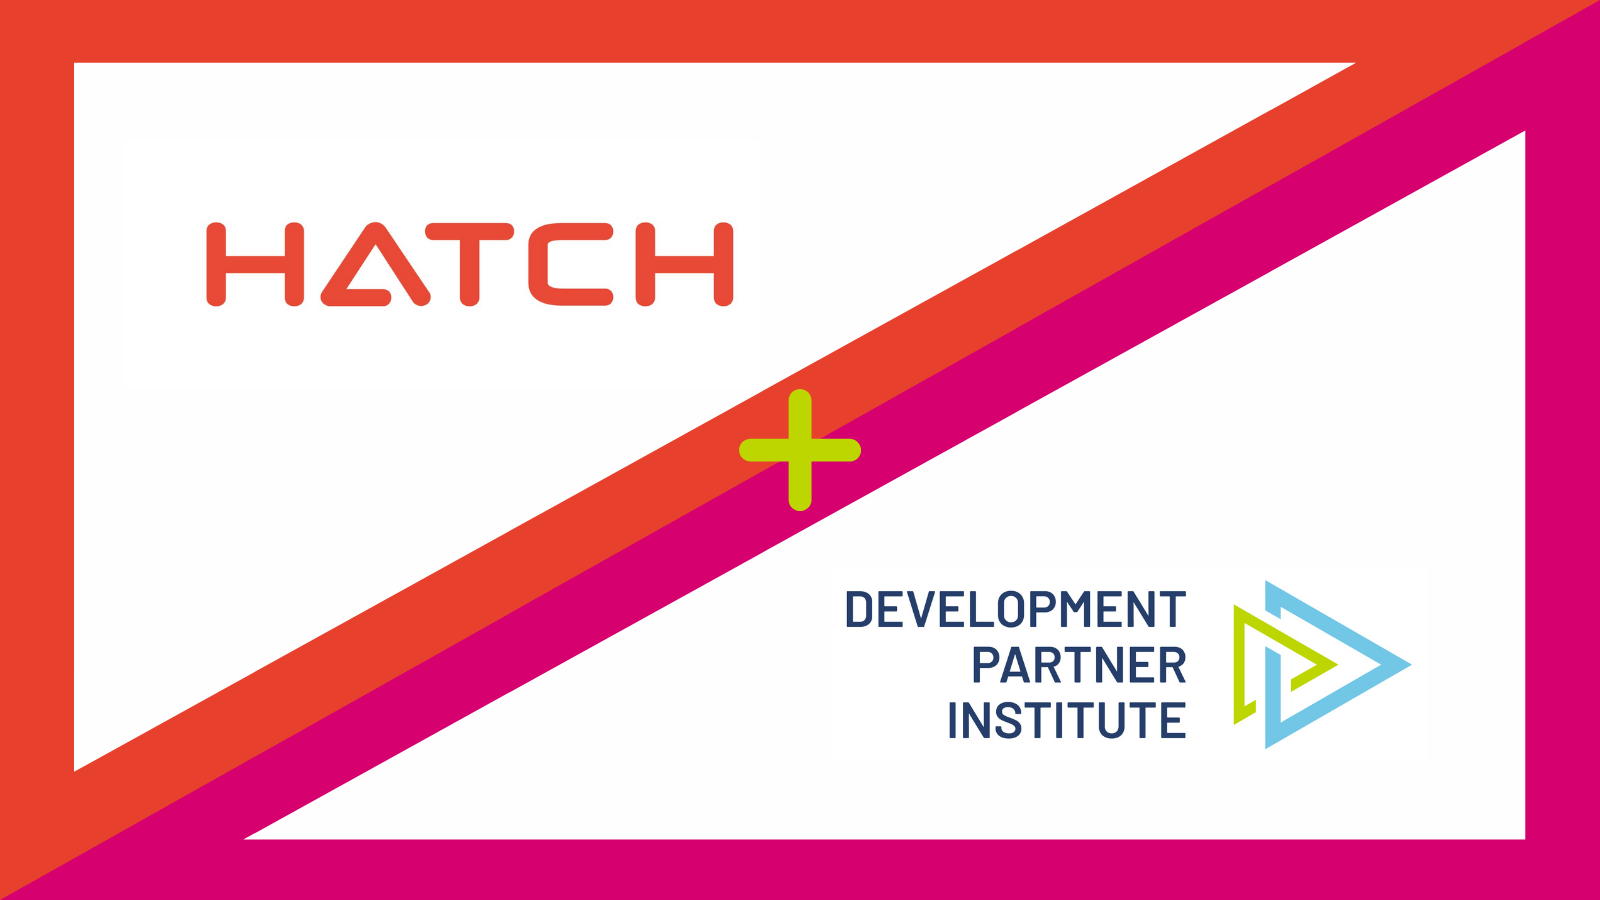 Hatch renews its support for the Development Partner Institute